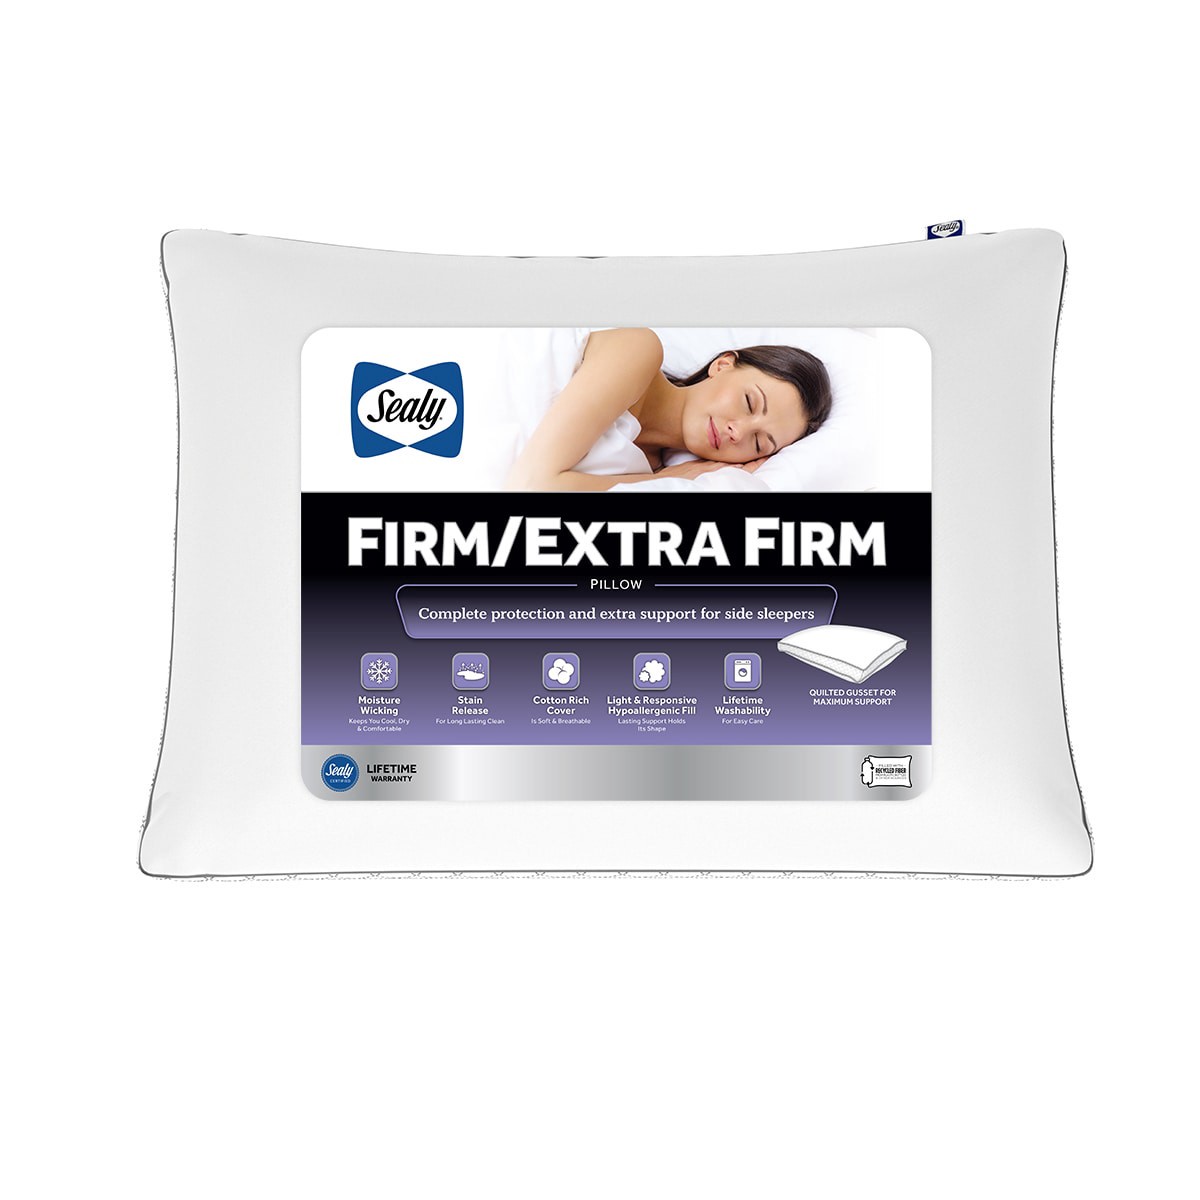 slide 1 of 29, Sealy Firm/Extra Firm Support Pillow, King, 1 ct